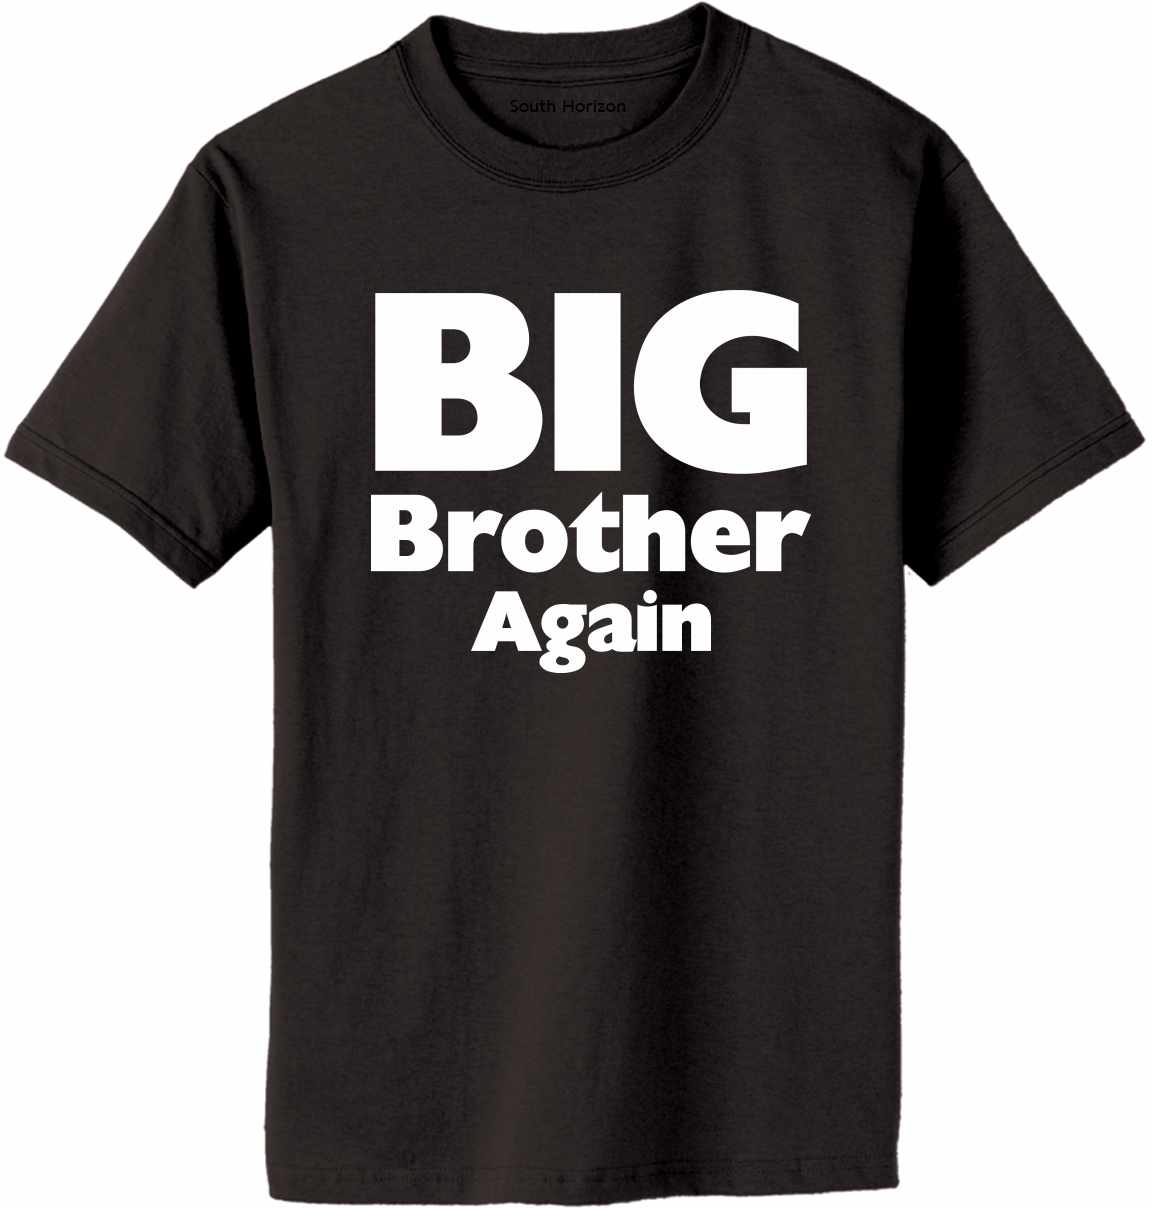 Big Brother Again on Adult T-Shirt (#1333-1)